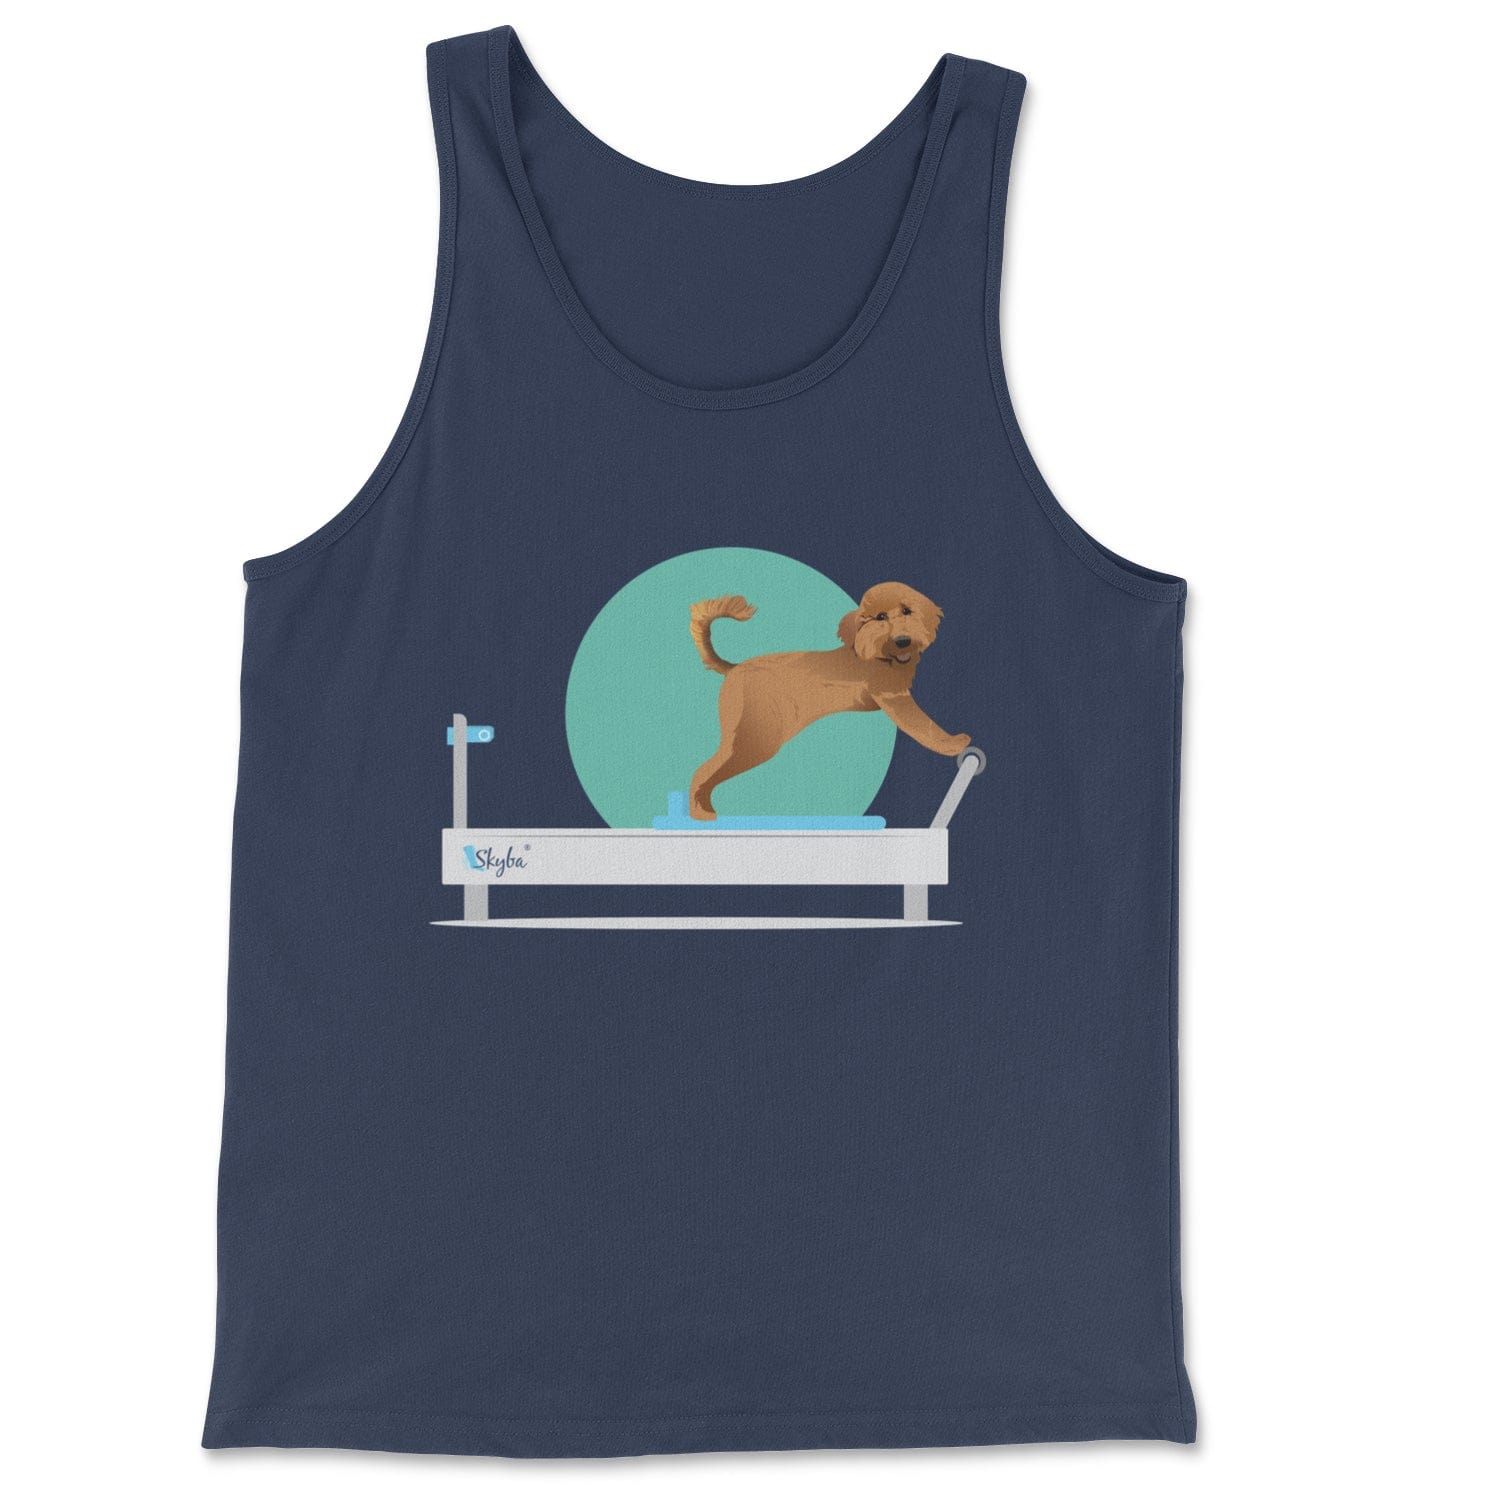 Goldendoodle on the Reformer - Classic Tank Skyba Print Material